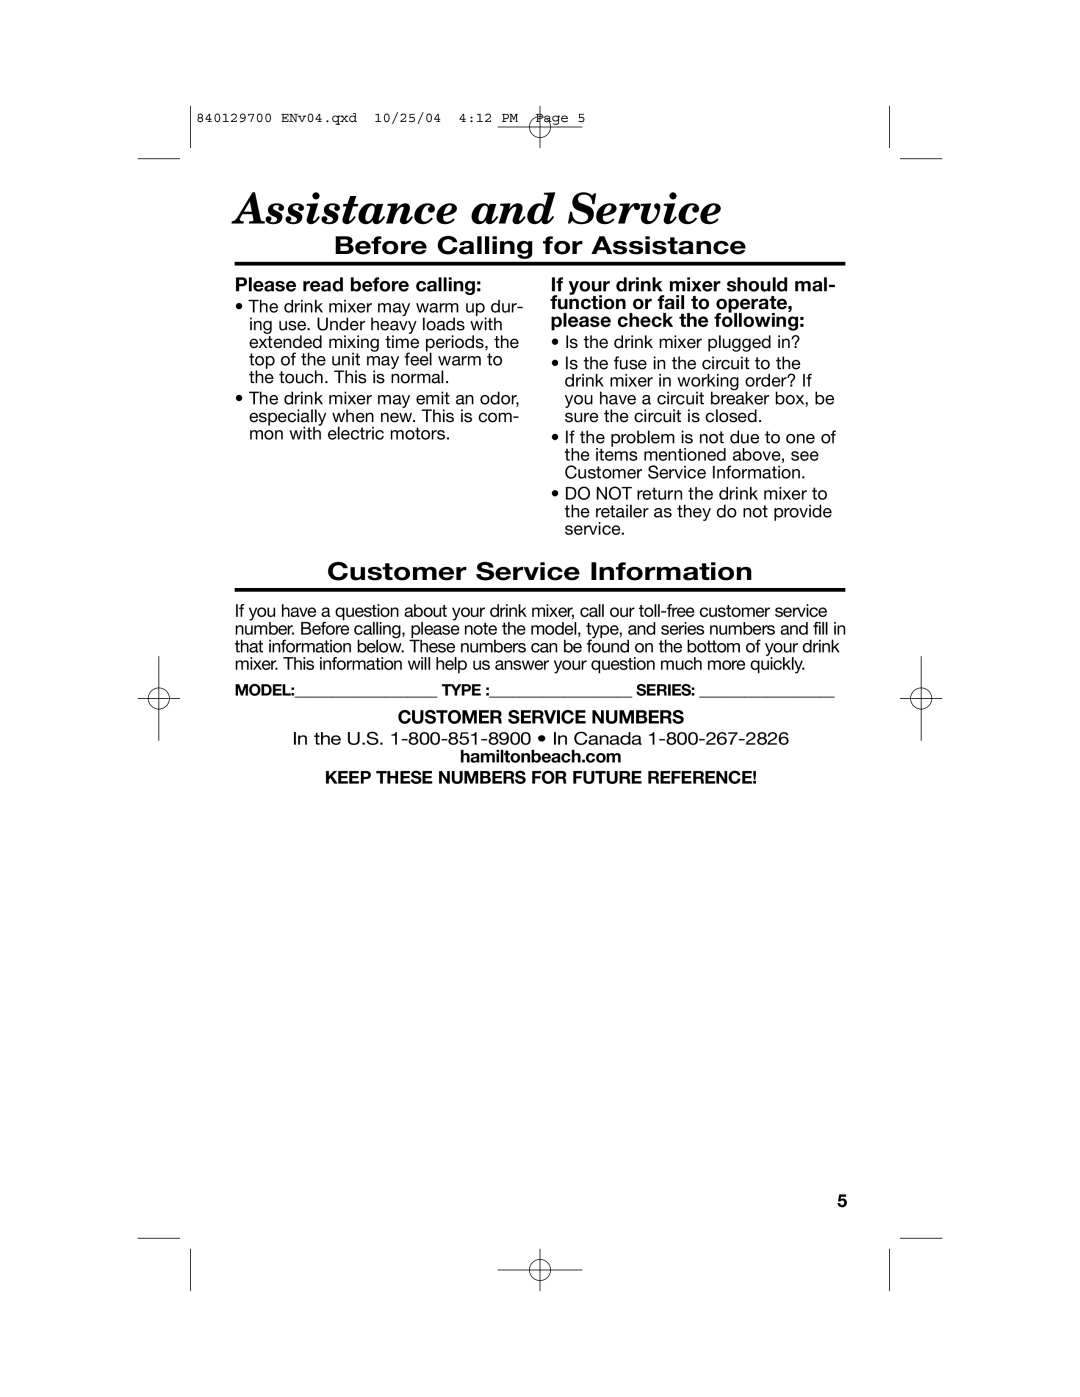 Hamilton Beach Drink Mixer manual Assistance and Service, Before Calling for Assistance, Customer Service Information 